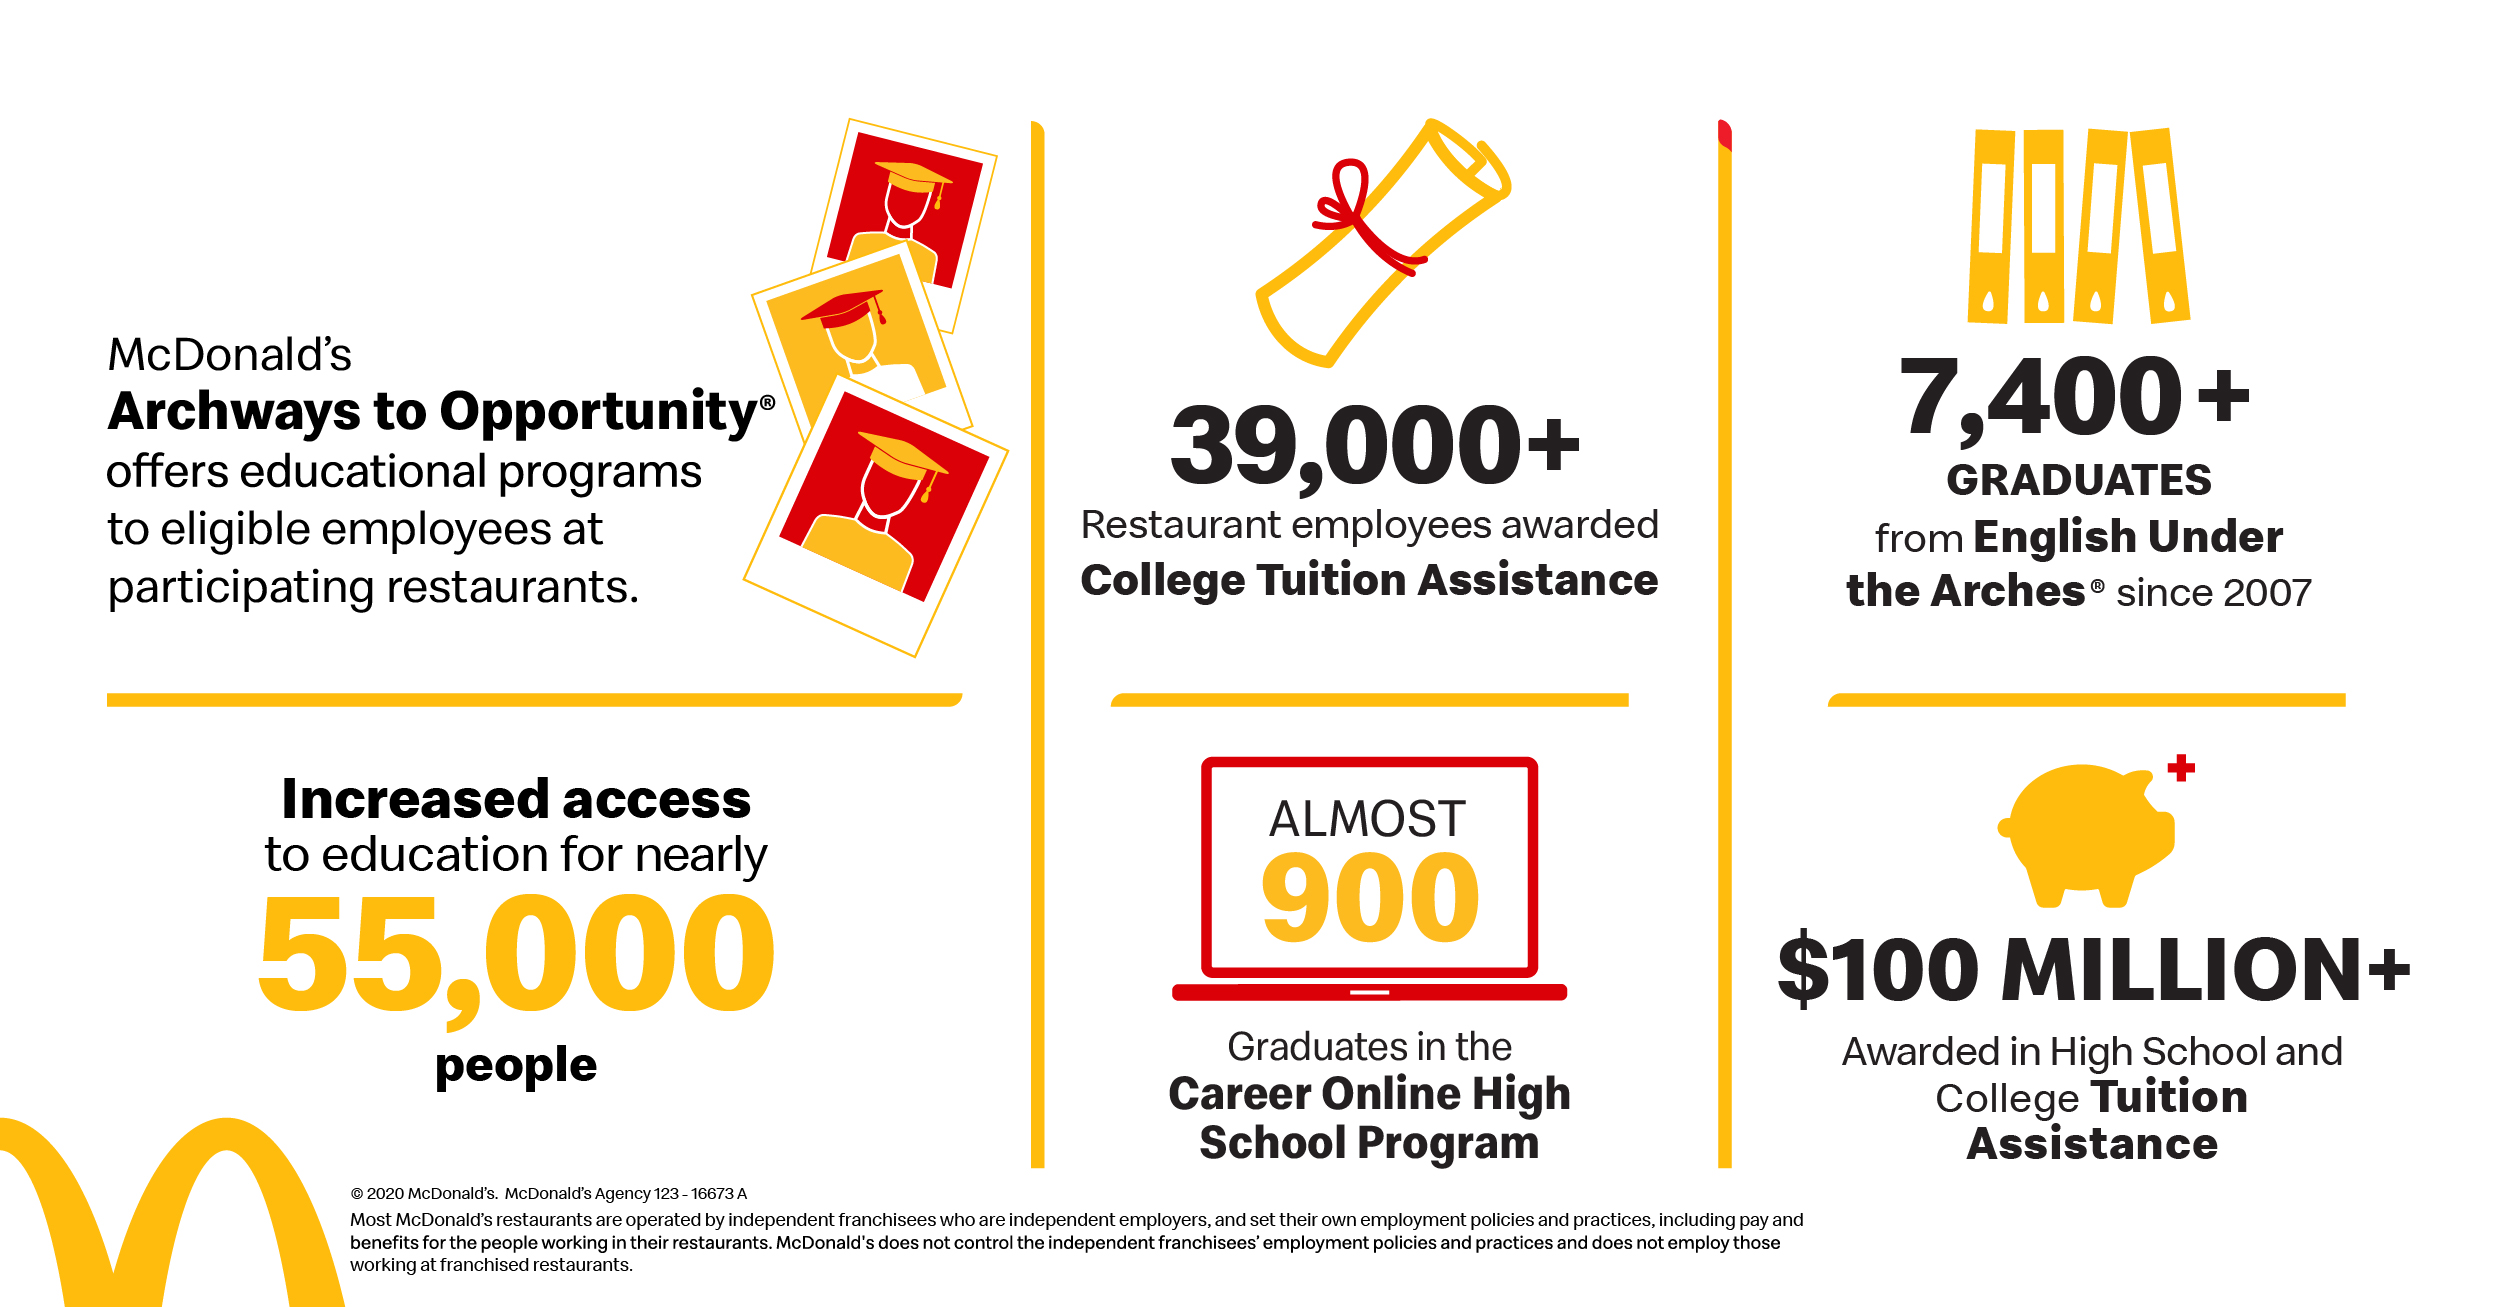 McDonald's Archways to Opportunity offers educational programs to eligible employees at participating restuarants.